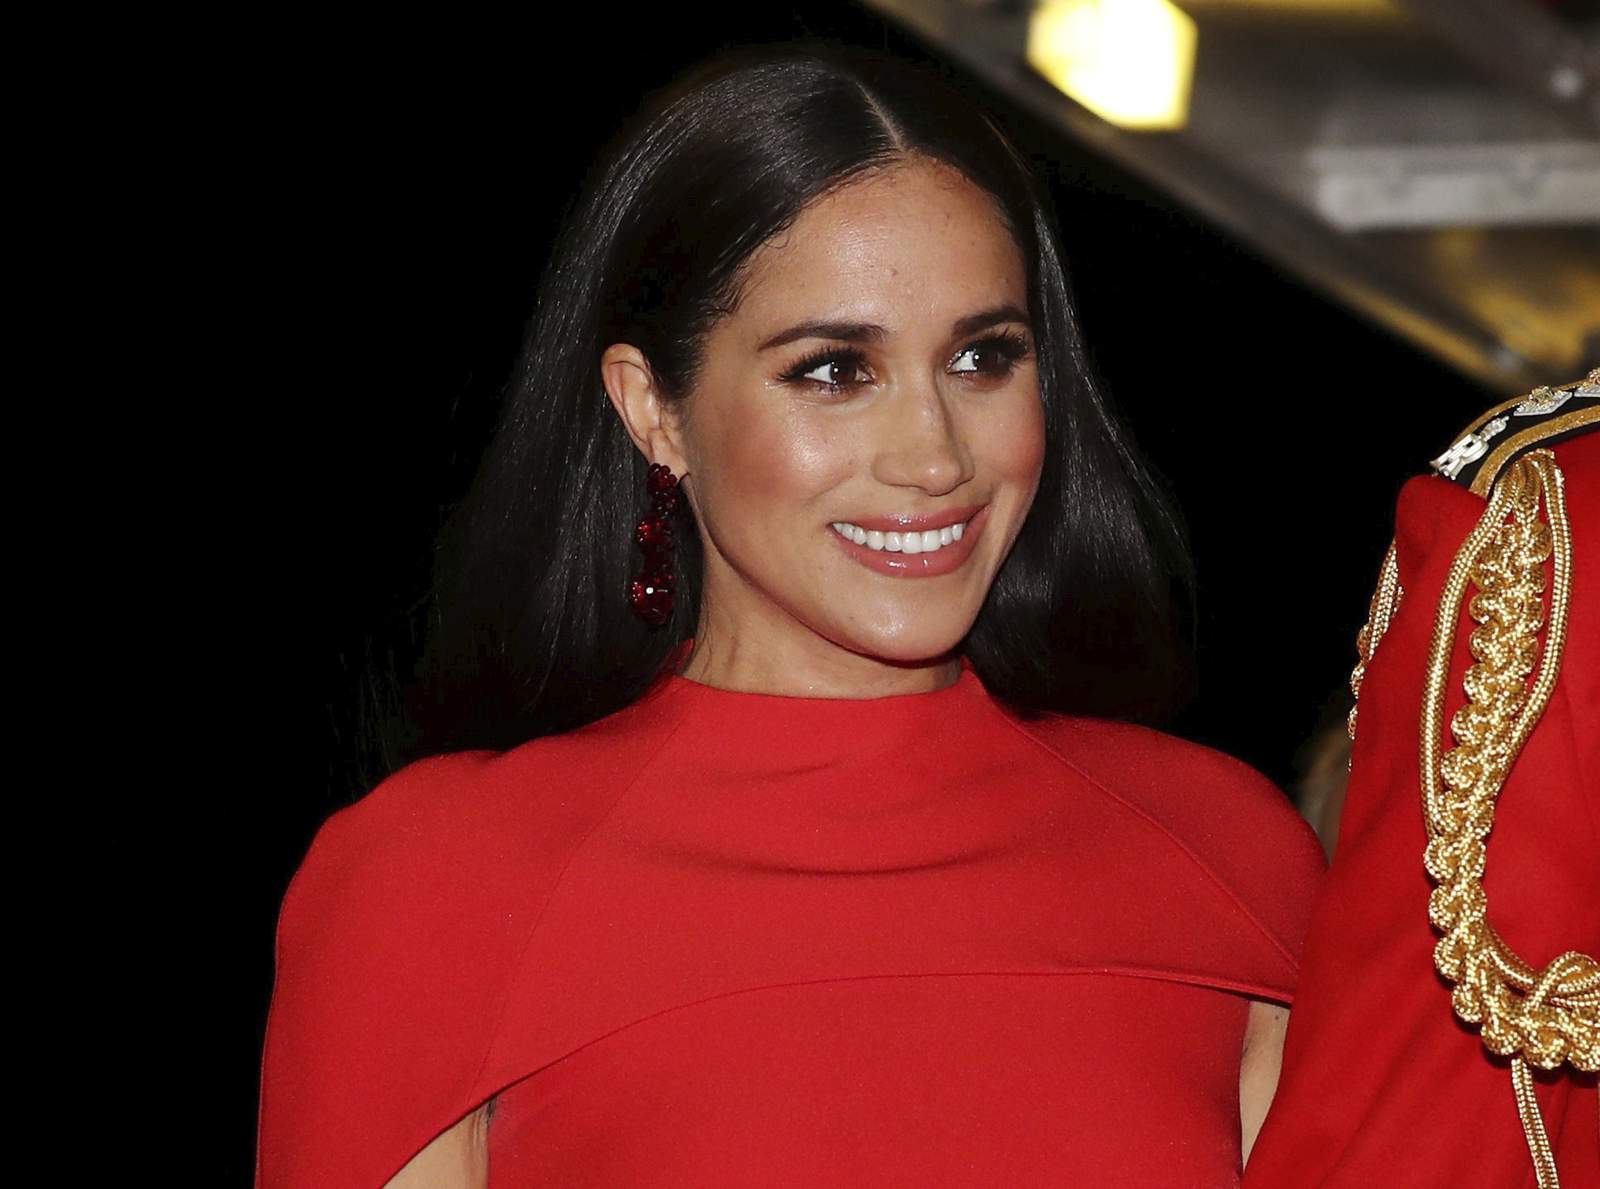 UK judge says newspaper invaded Meghan's privacy with letter